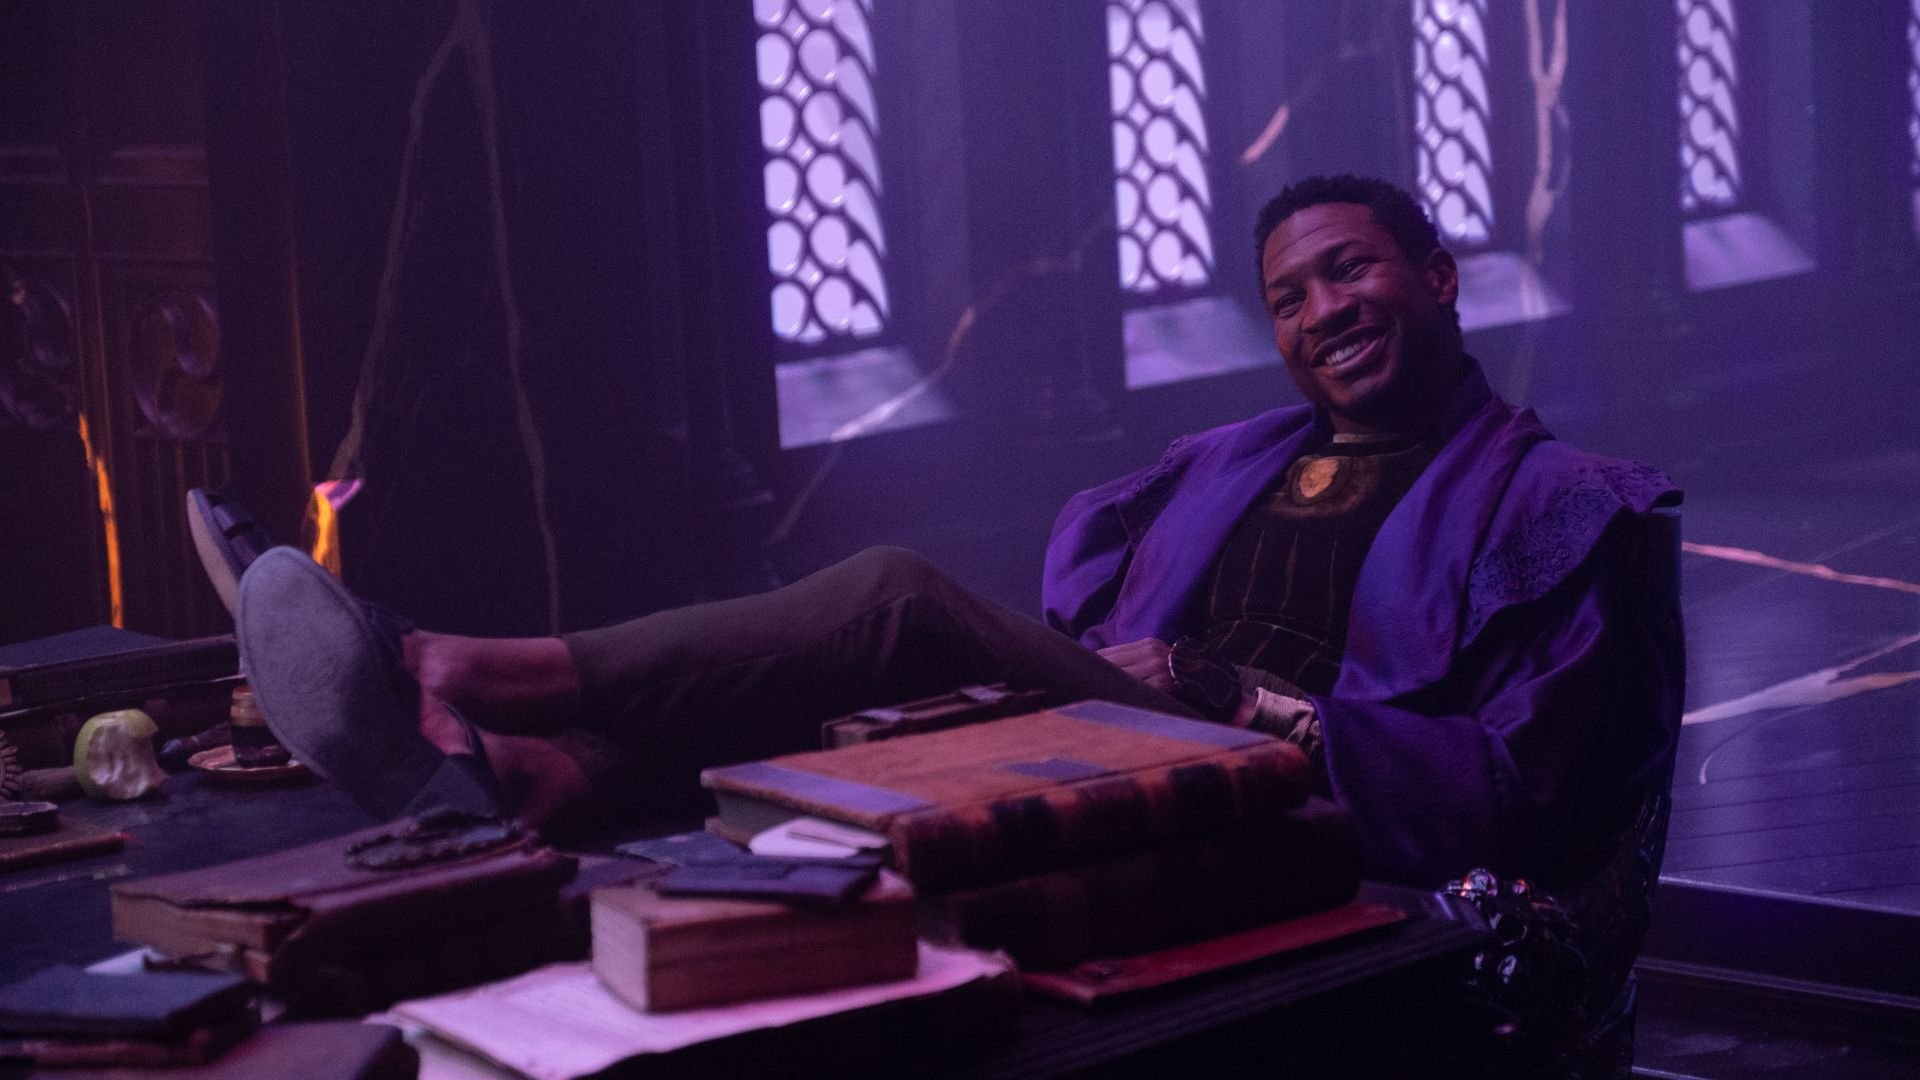 The one who stays smiles as he puts his feet up on a table in Loki episode 6